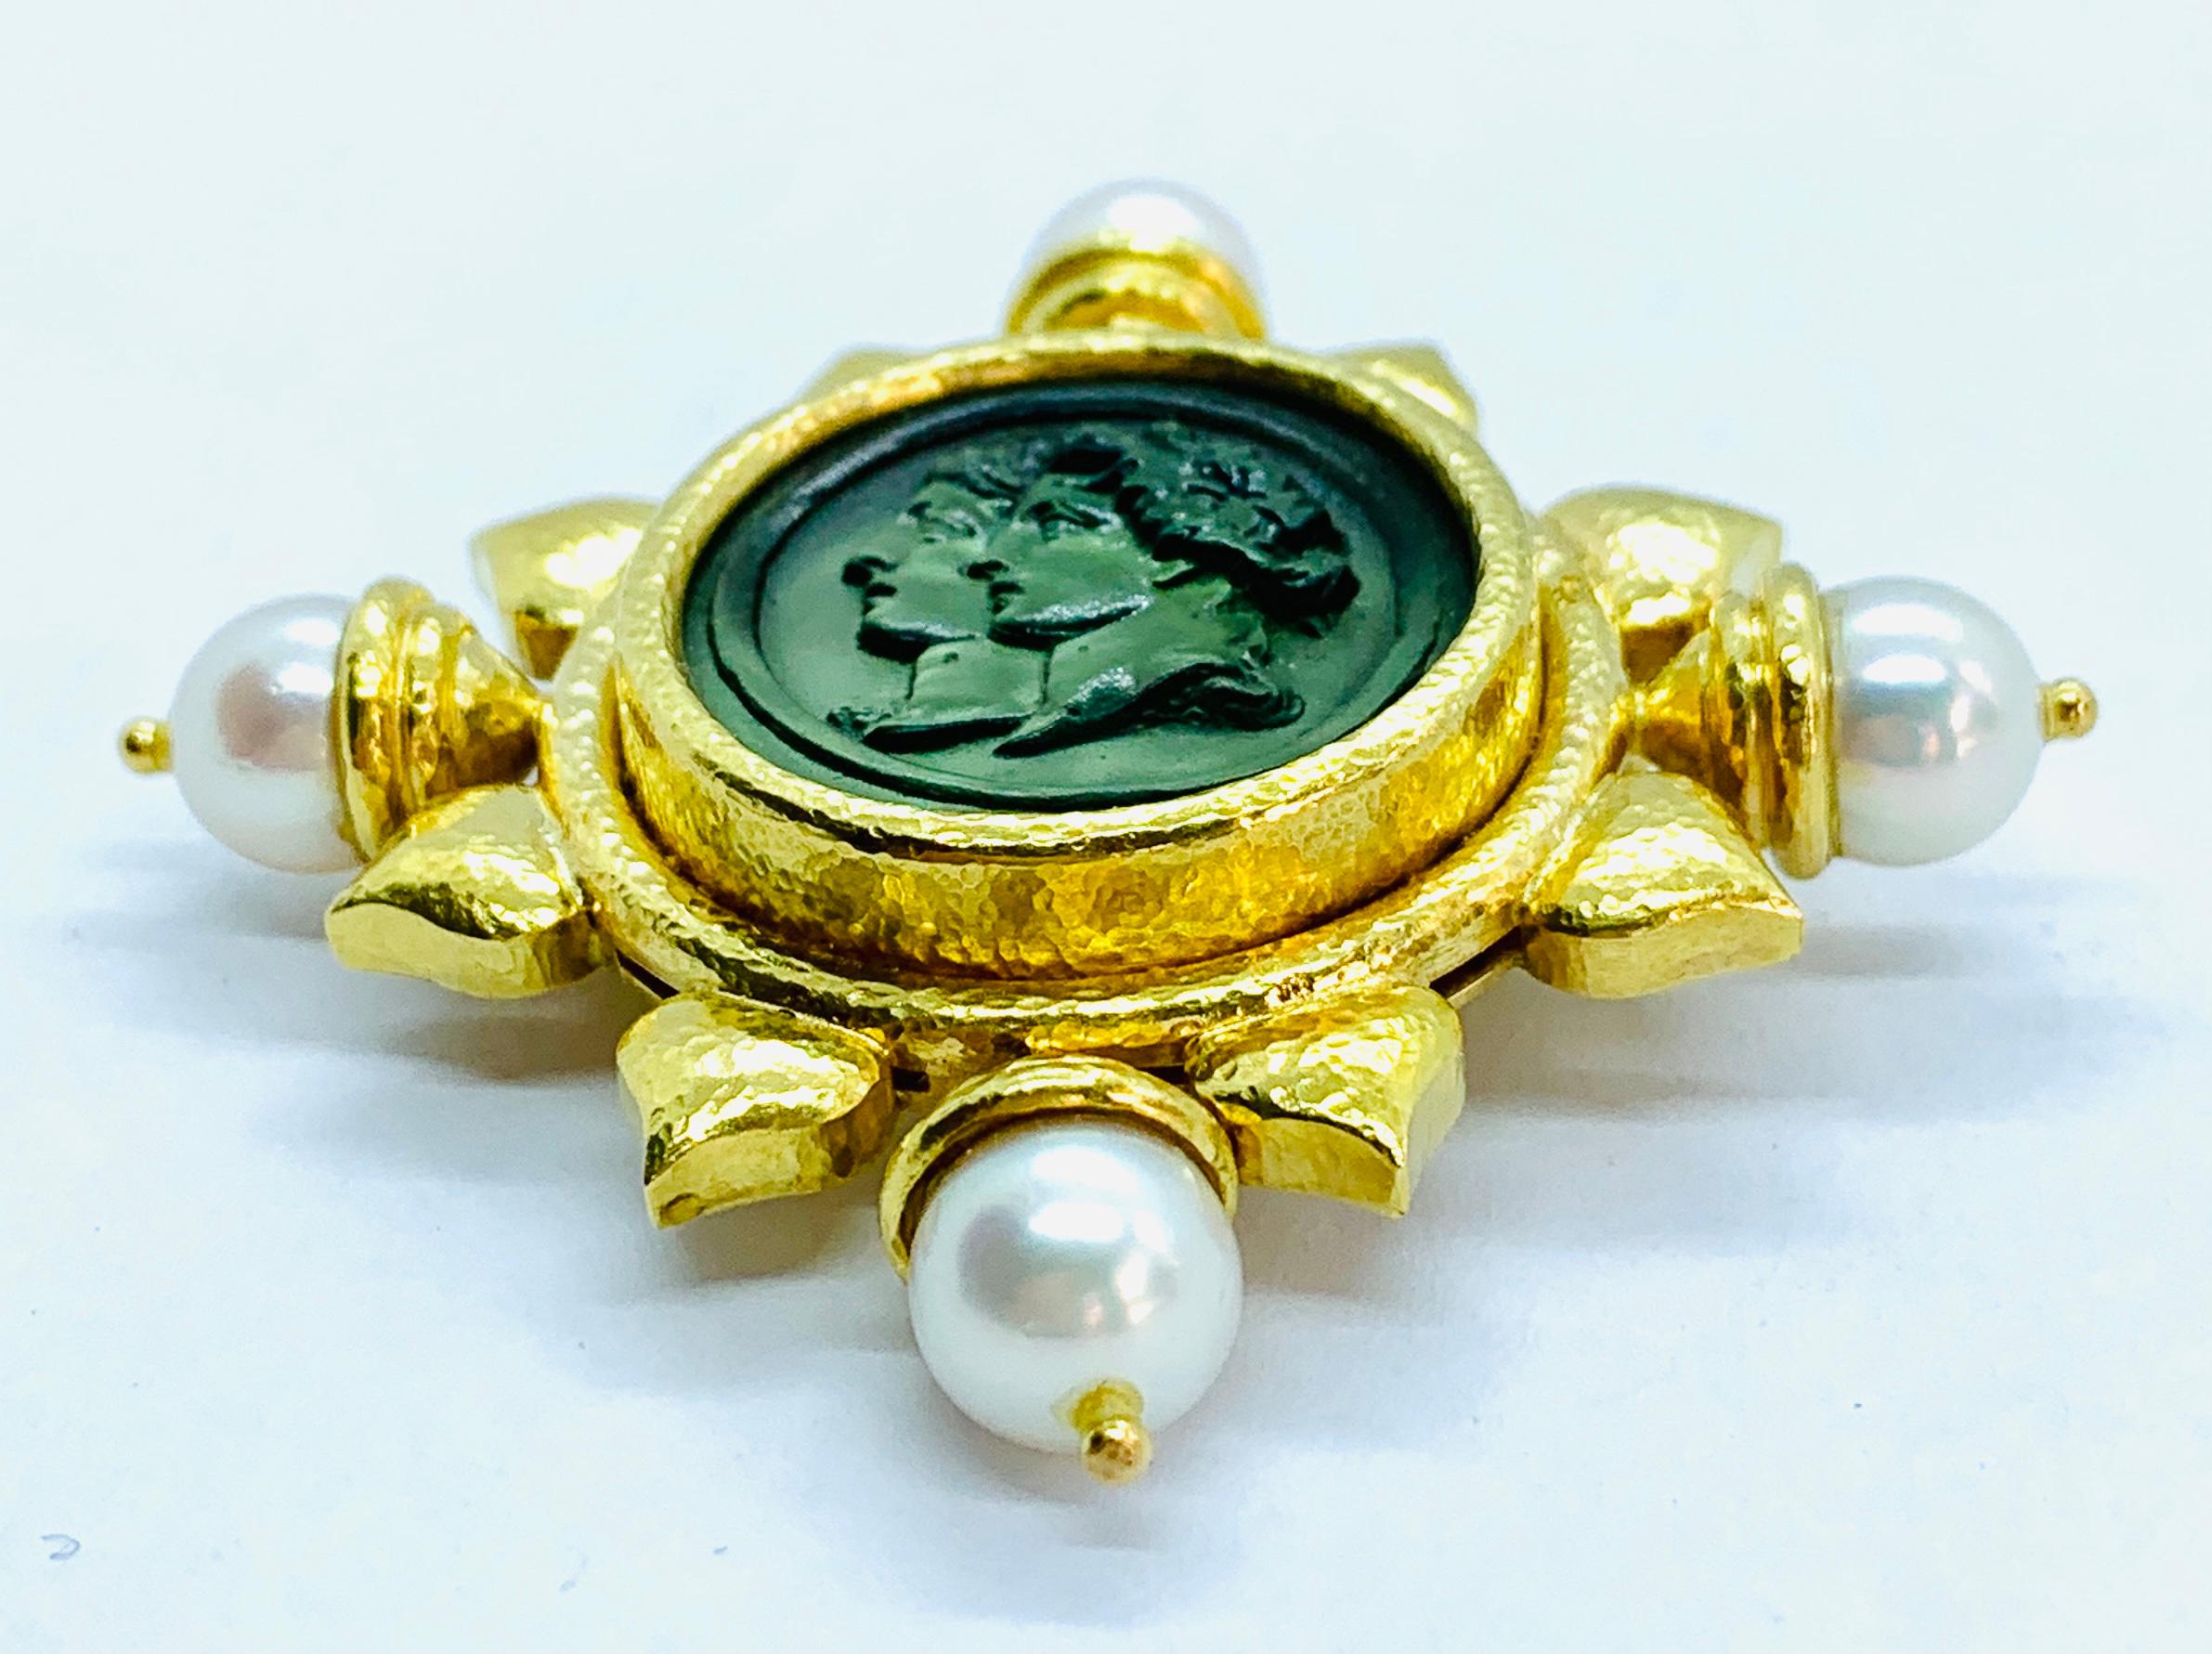 This is a gorgeous and rare vintage piece! Designer Elizabeth Locke piece that can be worn as a brooch or a pendant. It is made in 18K yellow Gold with four round pearls with a carved green intaglio at the center. The piece measures 2 by 2 inches